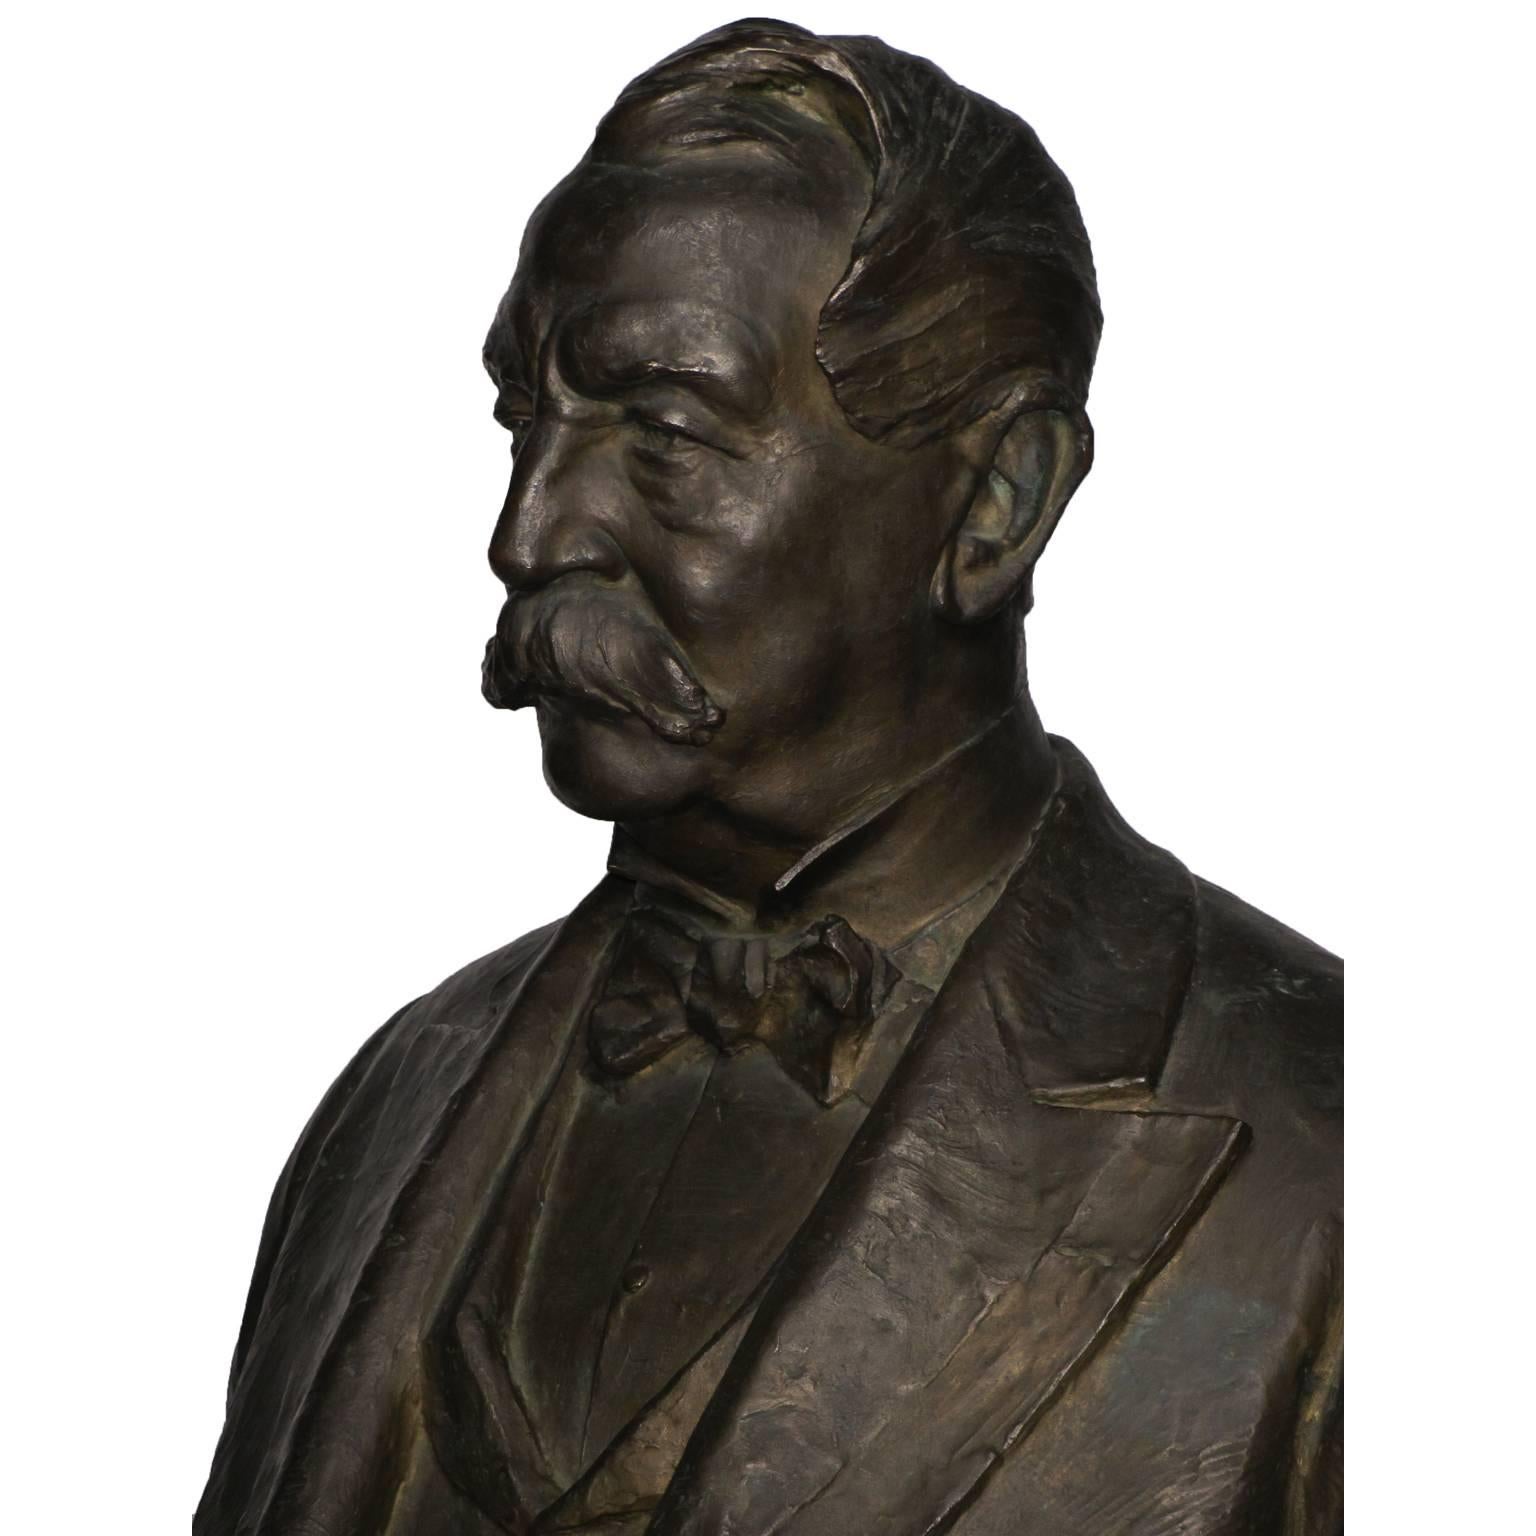 A very fine and larger-than-life and very realistic museum quality patinated bronze bust of President William H. Taft (1857–1930) by Frederick Ernst Triebel (American, 1865-1944) cast by Nelli Foundry in Rome, Italy. William H. Taft, the 27th